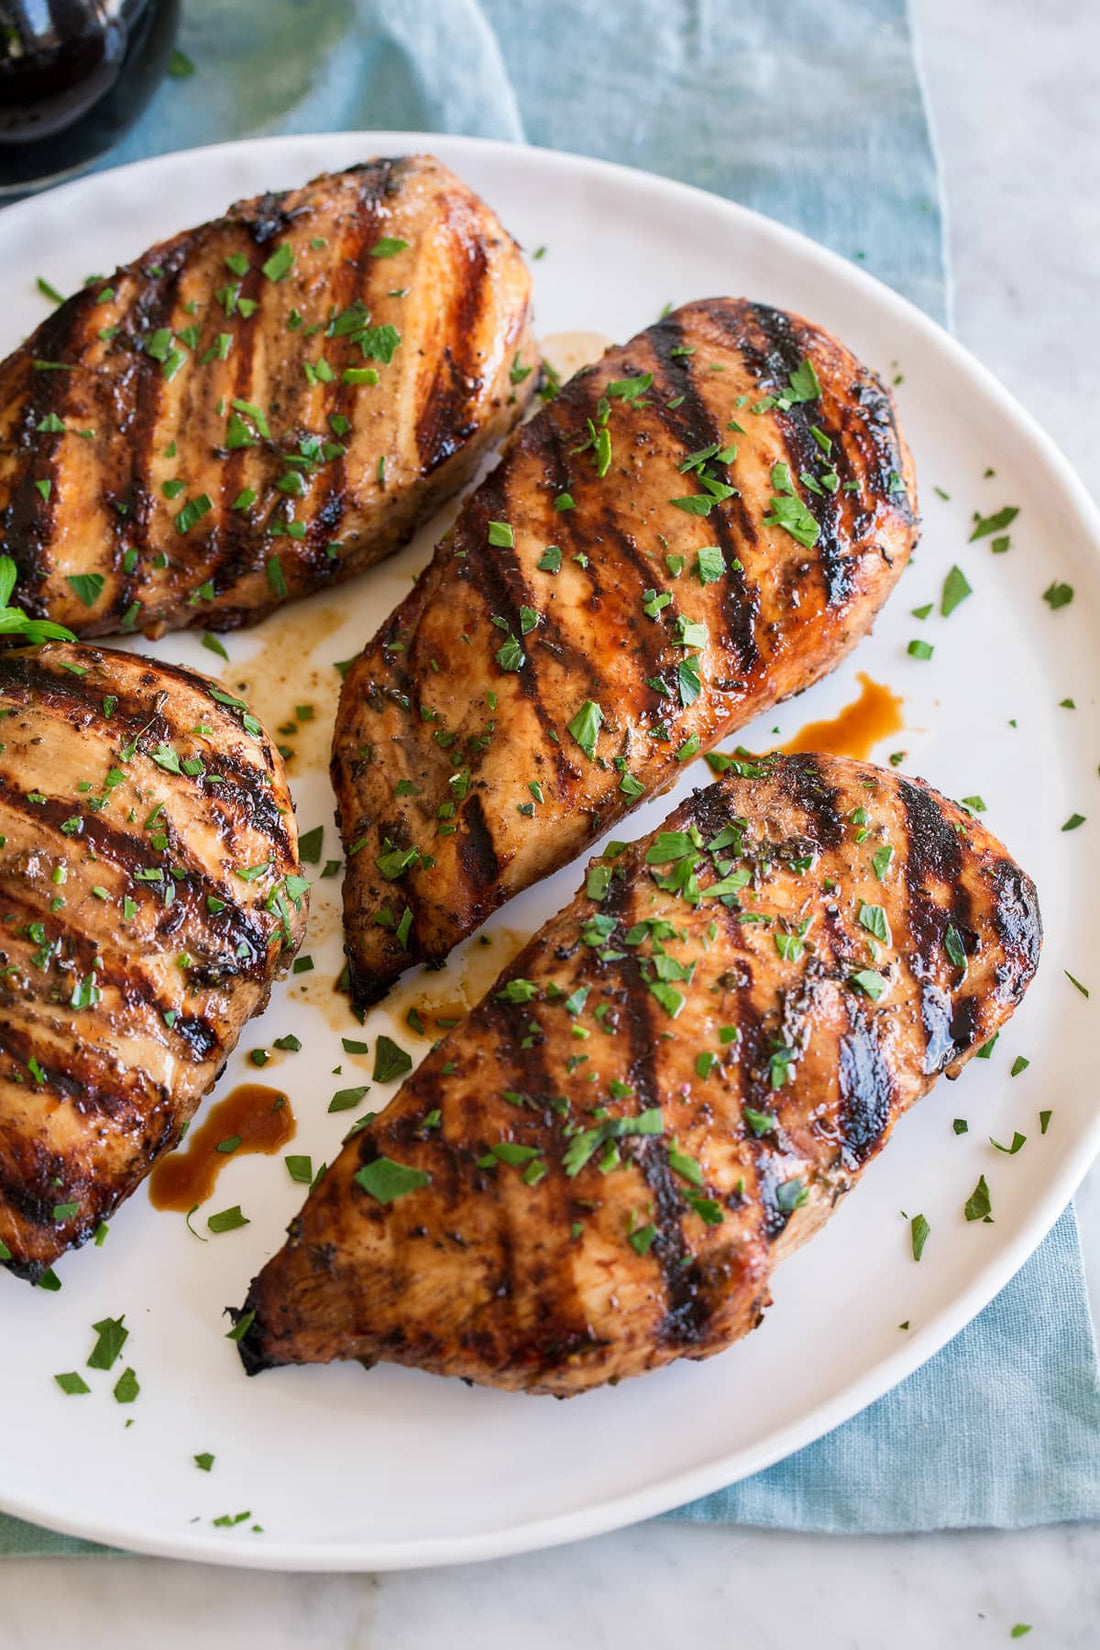 Baked Chicken with Dijon and Balsamic Vinegar